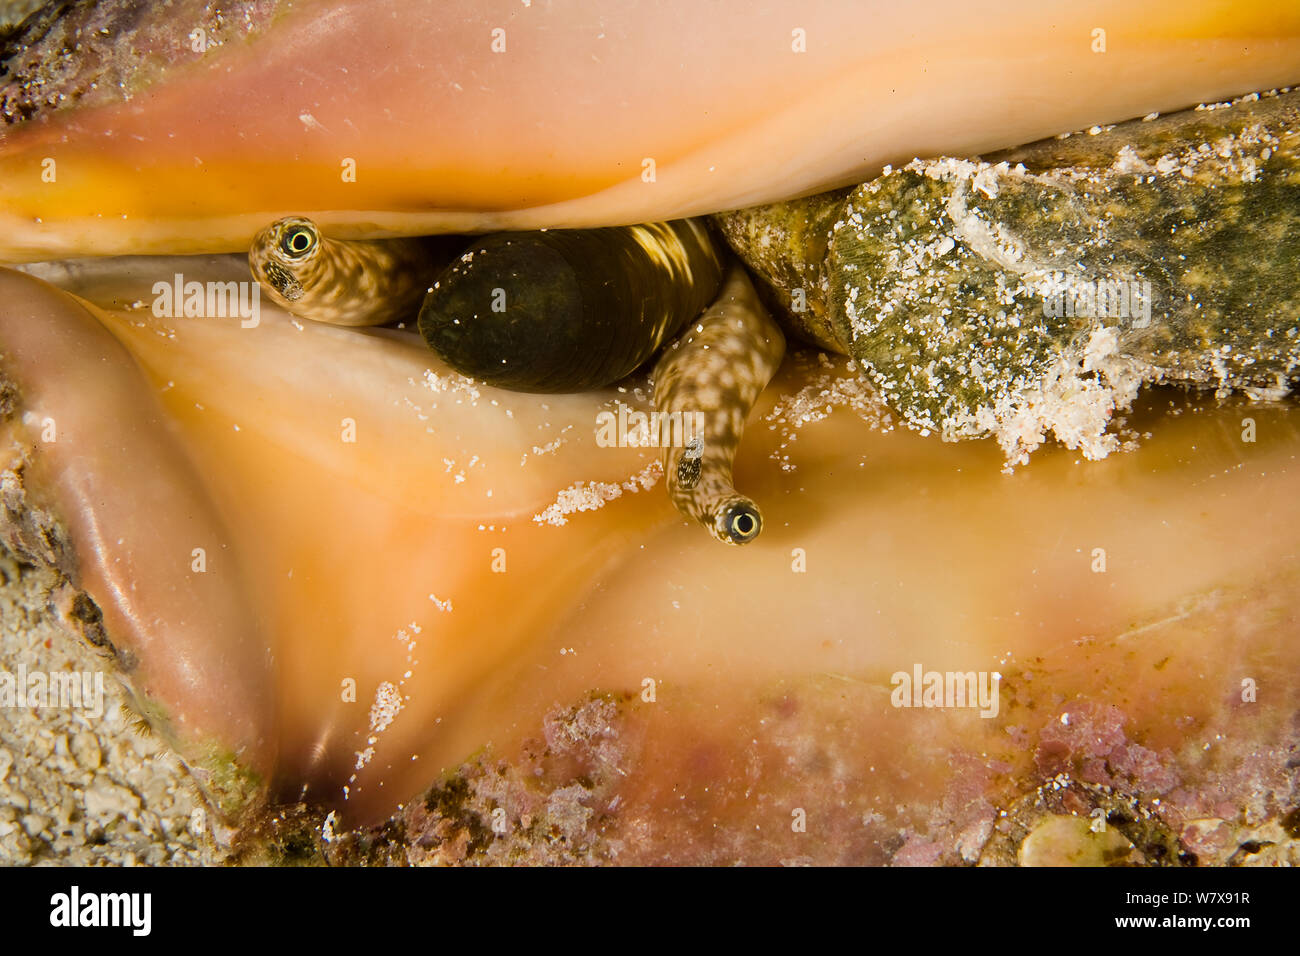 Close-up of the eyes and the mouth of a Strombus conch (Strombus latissimus) New Caledonia. Pacific Ocean. Stock Photo